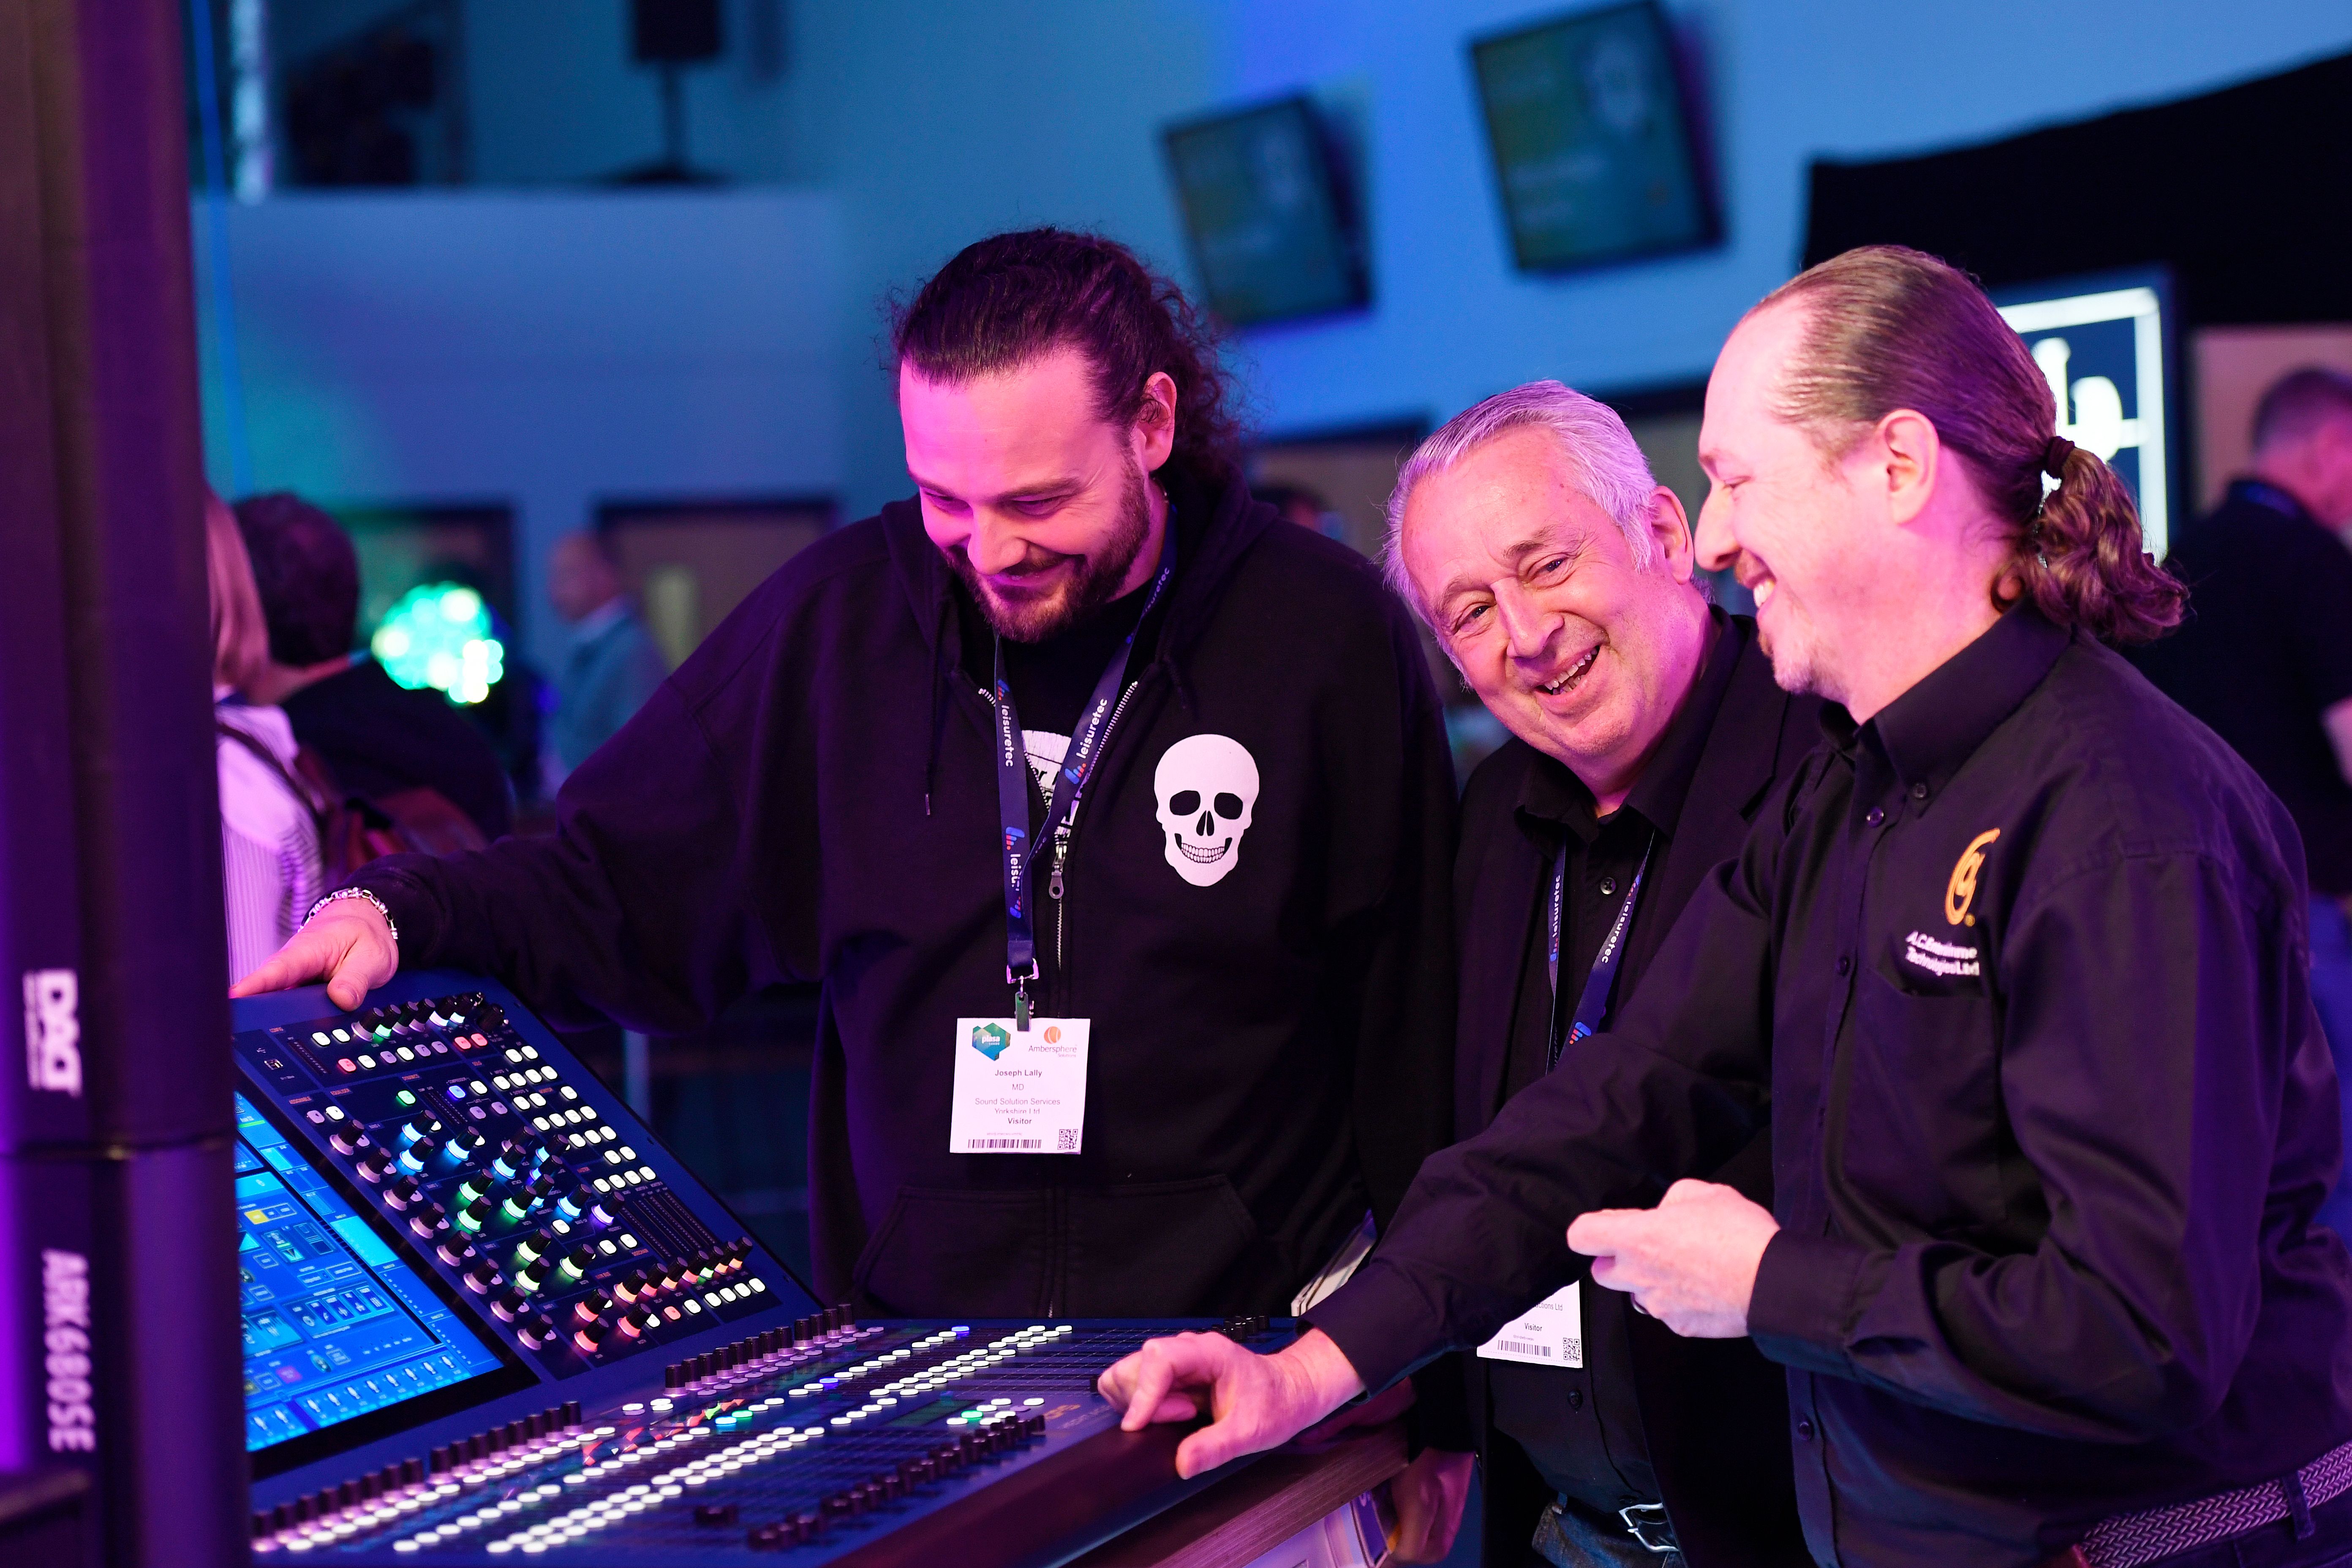 A.C Entertainment Technologies demonstrating a pro sound desk to customers